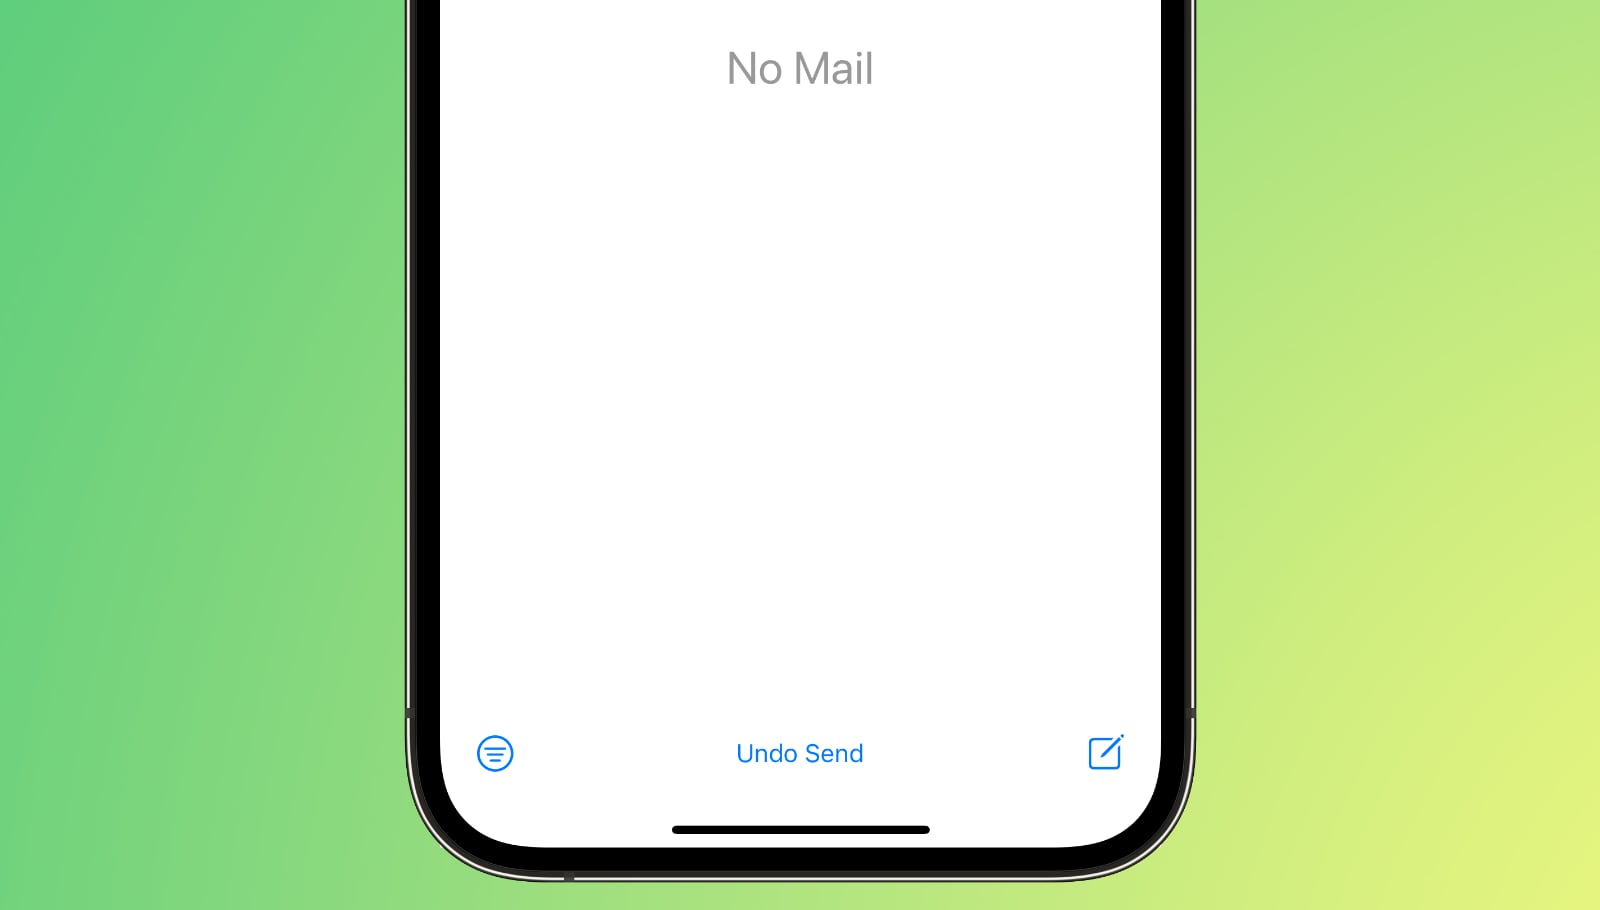 You Can Unsend an Email 10 Seconds After It’s Sent in iOS 16 Mail App